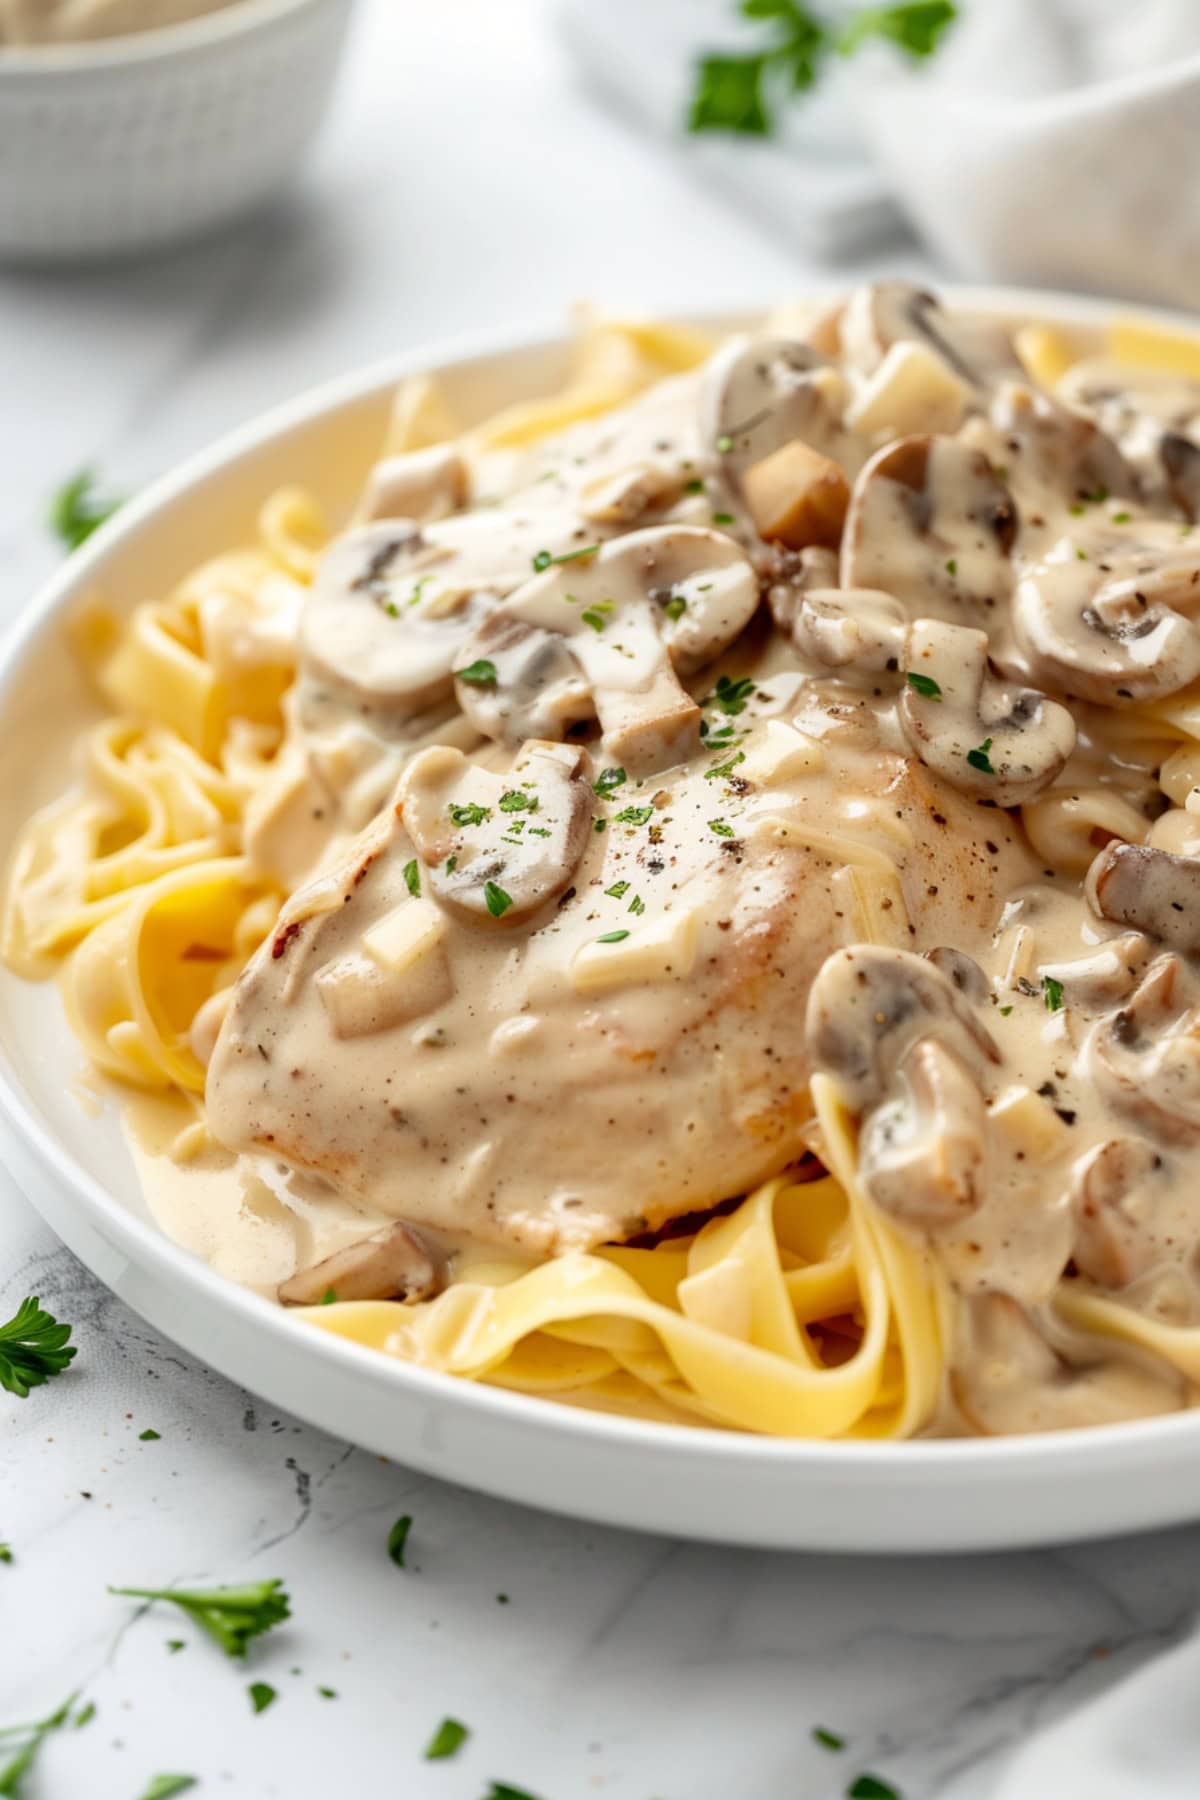 Chicken stroganoff served with egg noodles on a white plate.